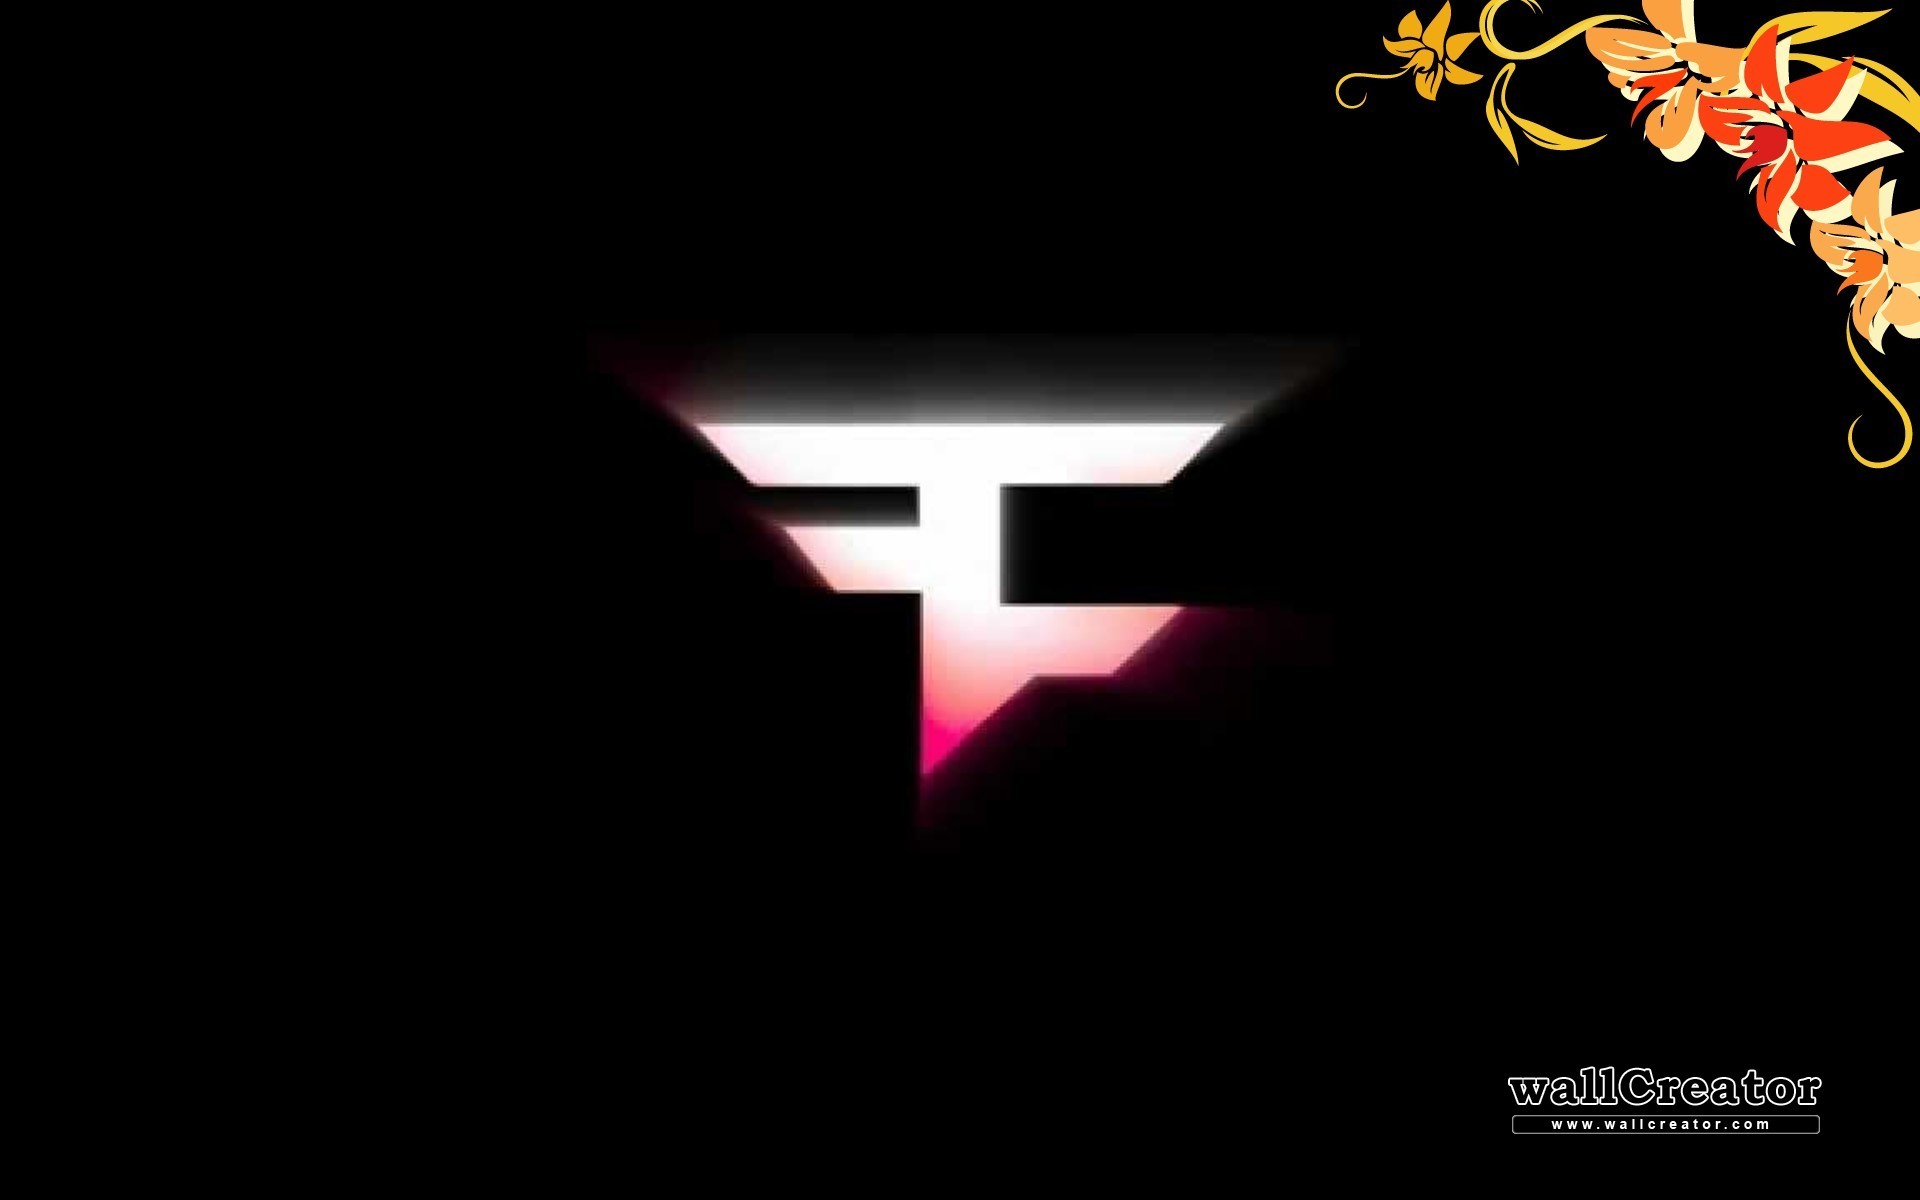 Tags: FaZe. download this wallpaper